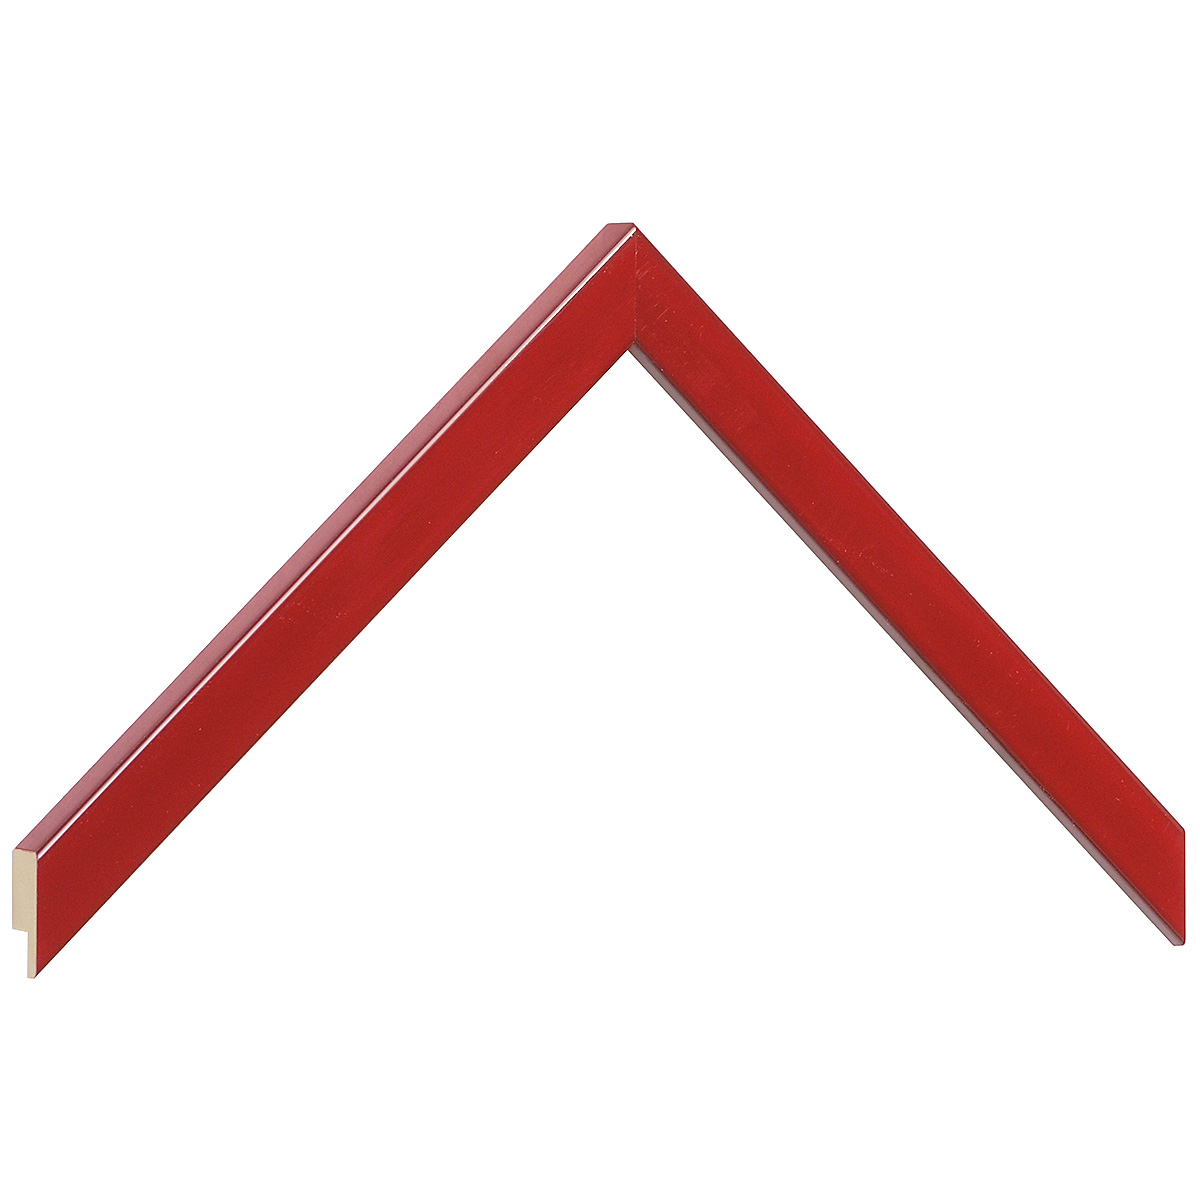 Moulding ayous - width 15mm height 14 - Glossy red - Sample